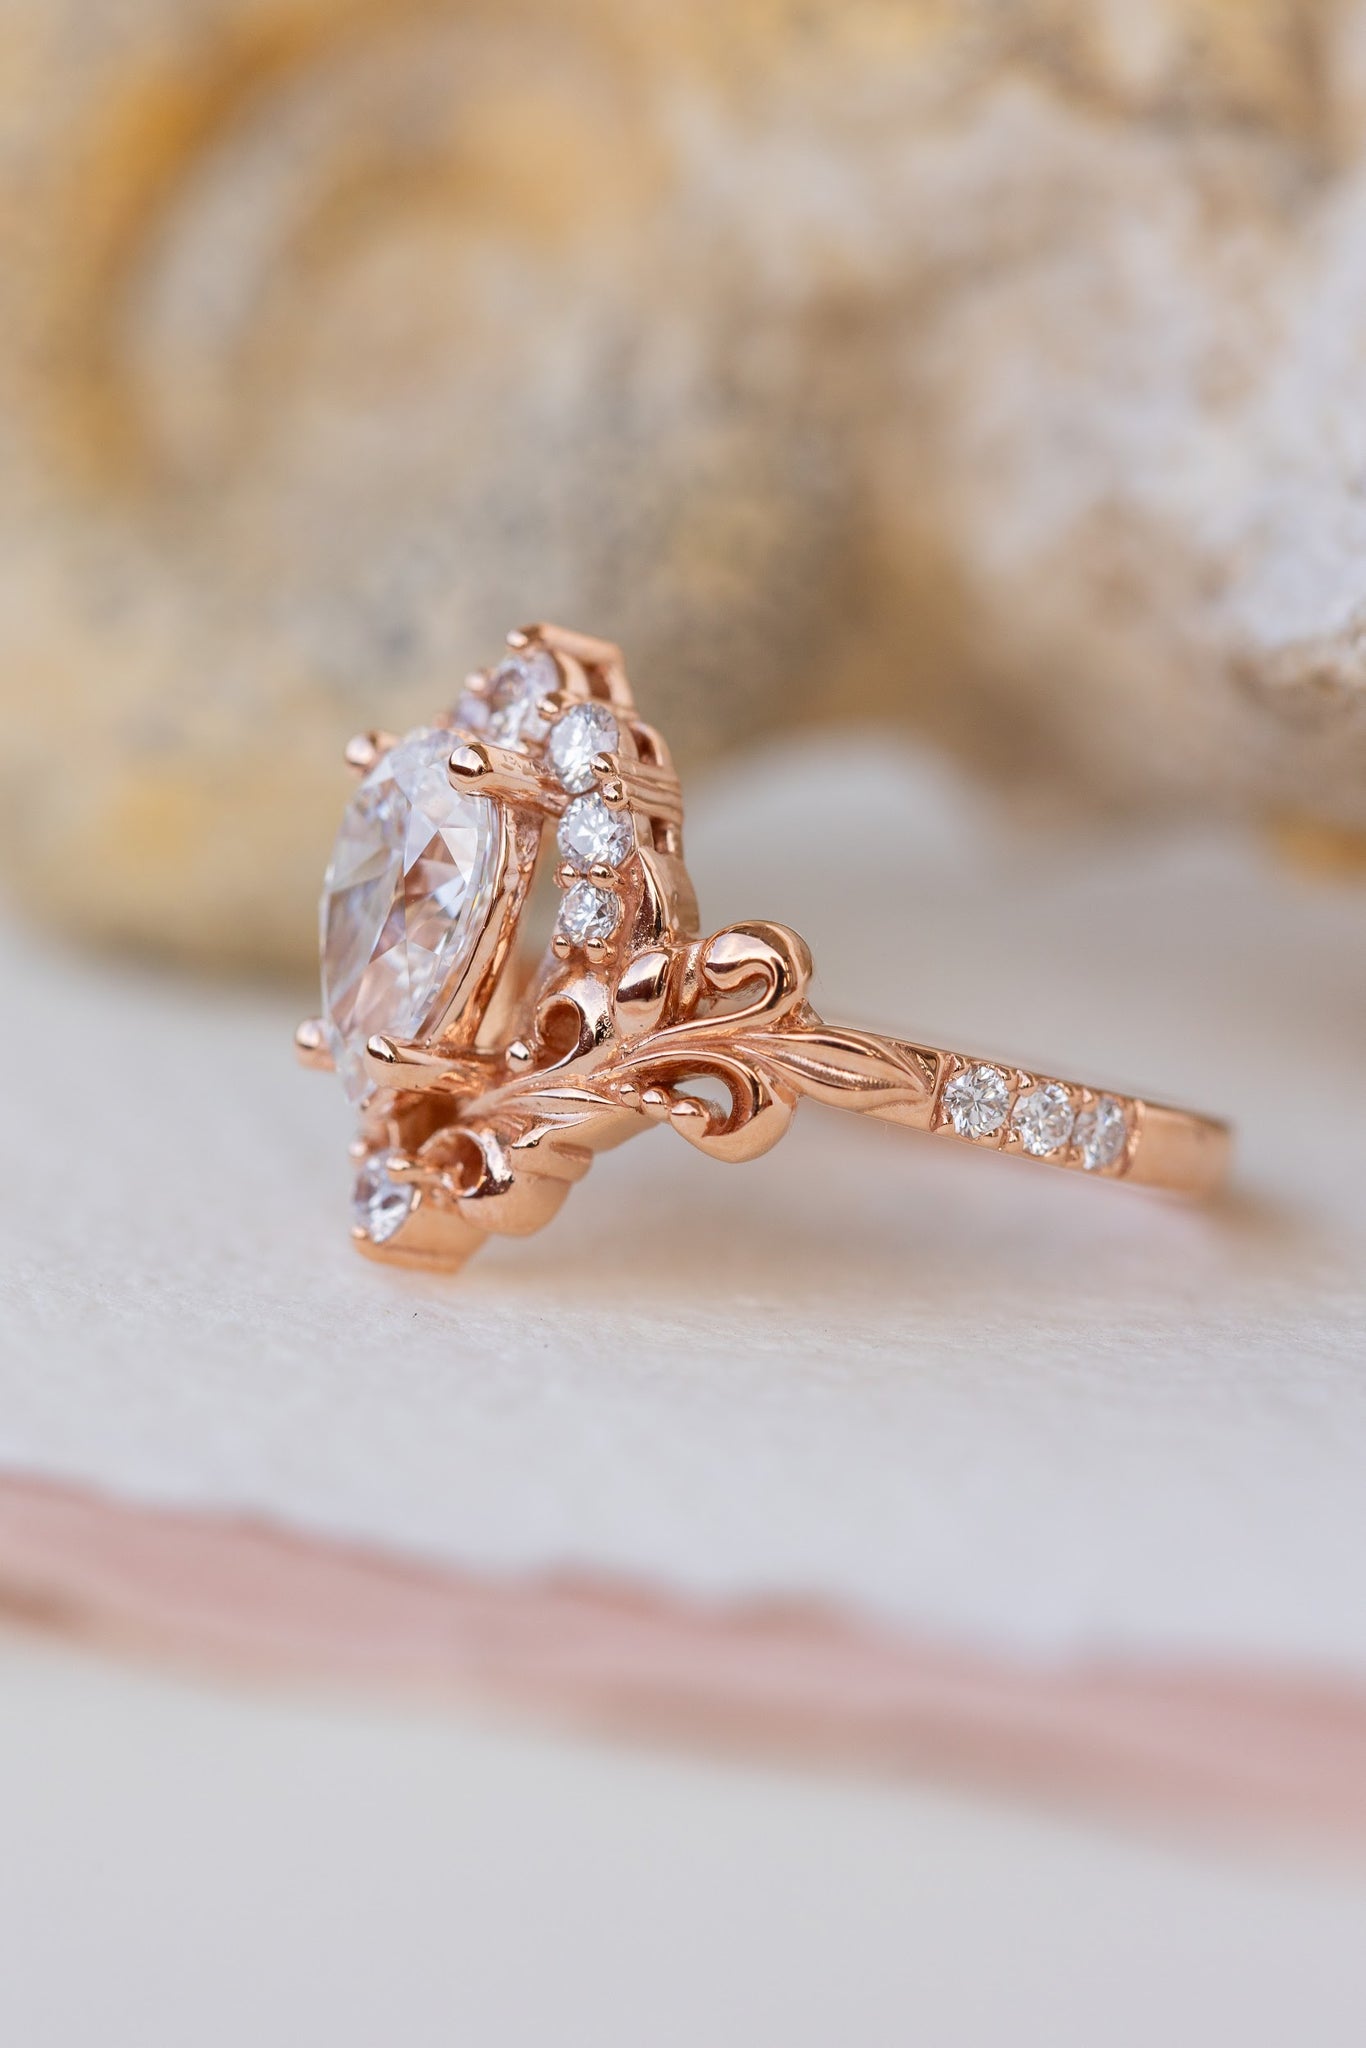 Lab grown diamond engagement ring, nature inspired  rose gold ring with diamond halo / Sophie - Eden Garden Jewelry™